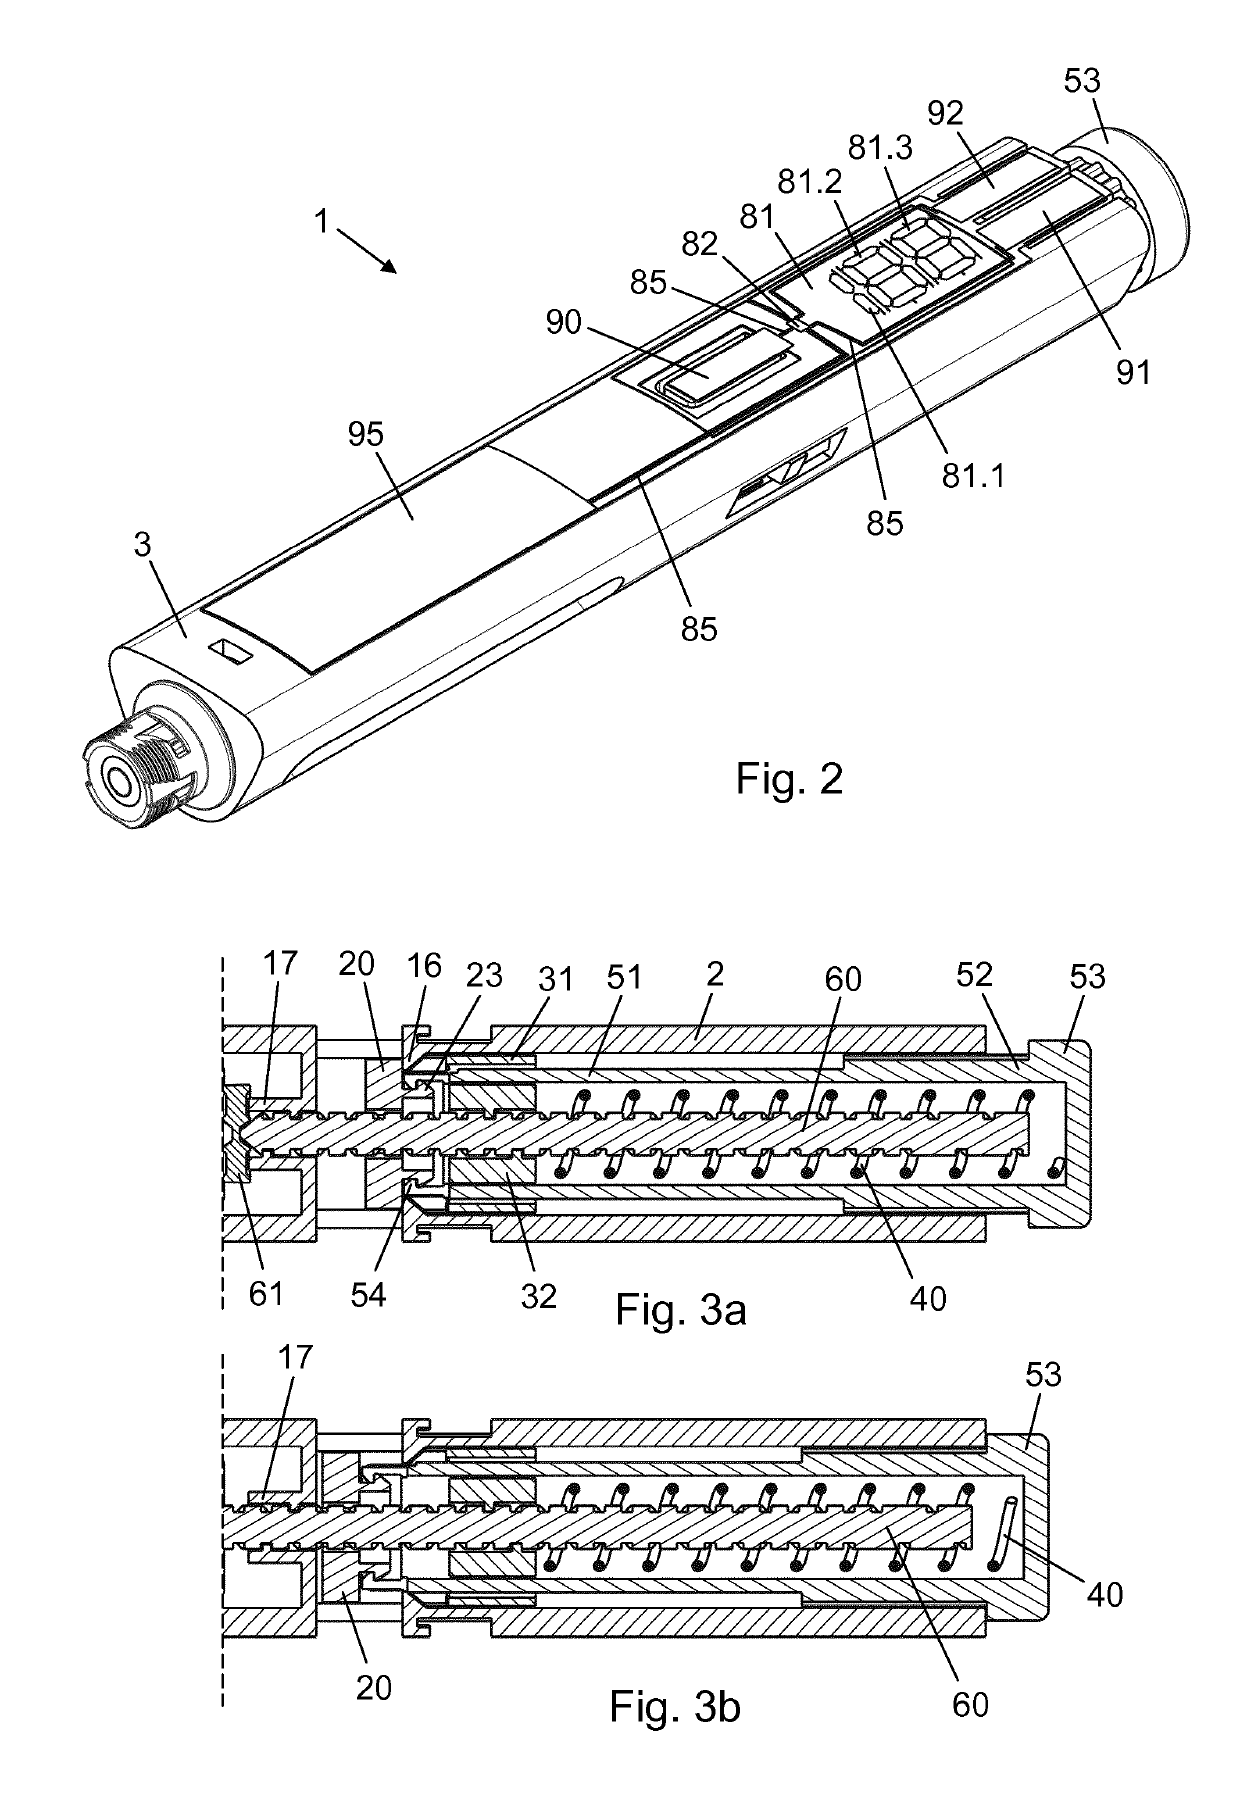 Drug injection device with deflectable housing portion